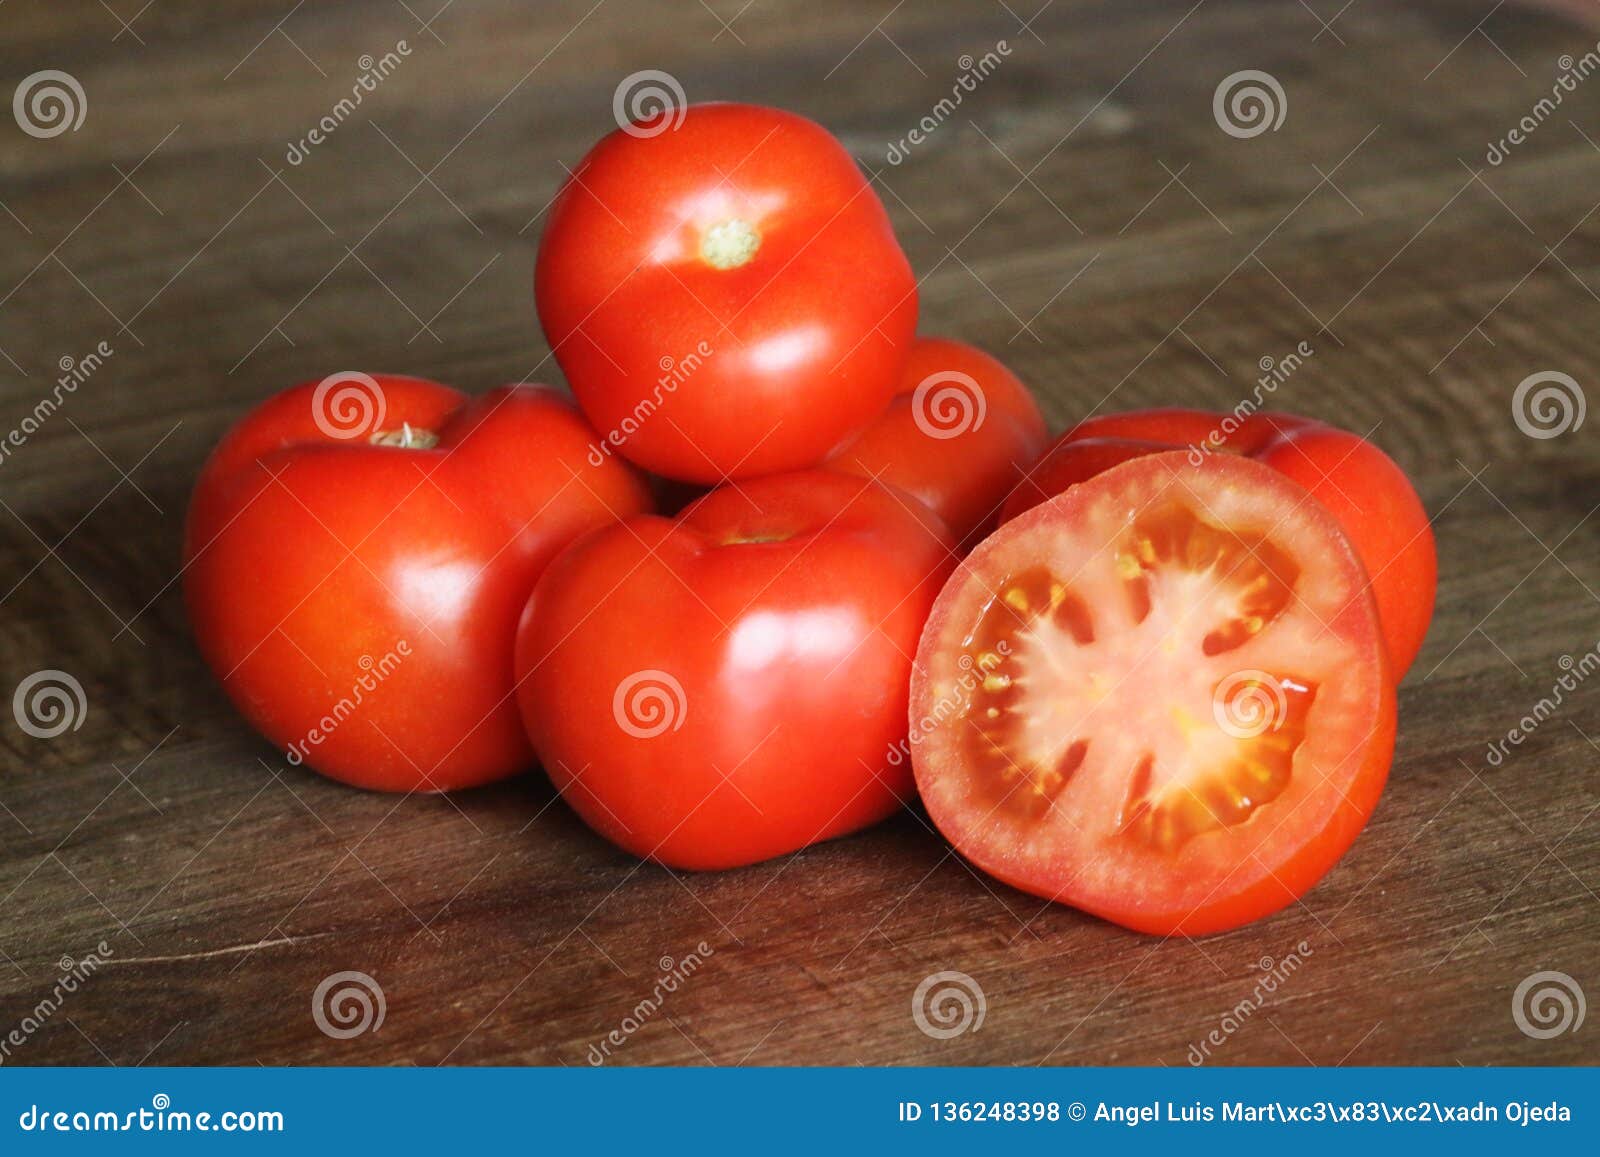 still life of tomatoes on a table.